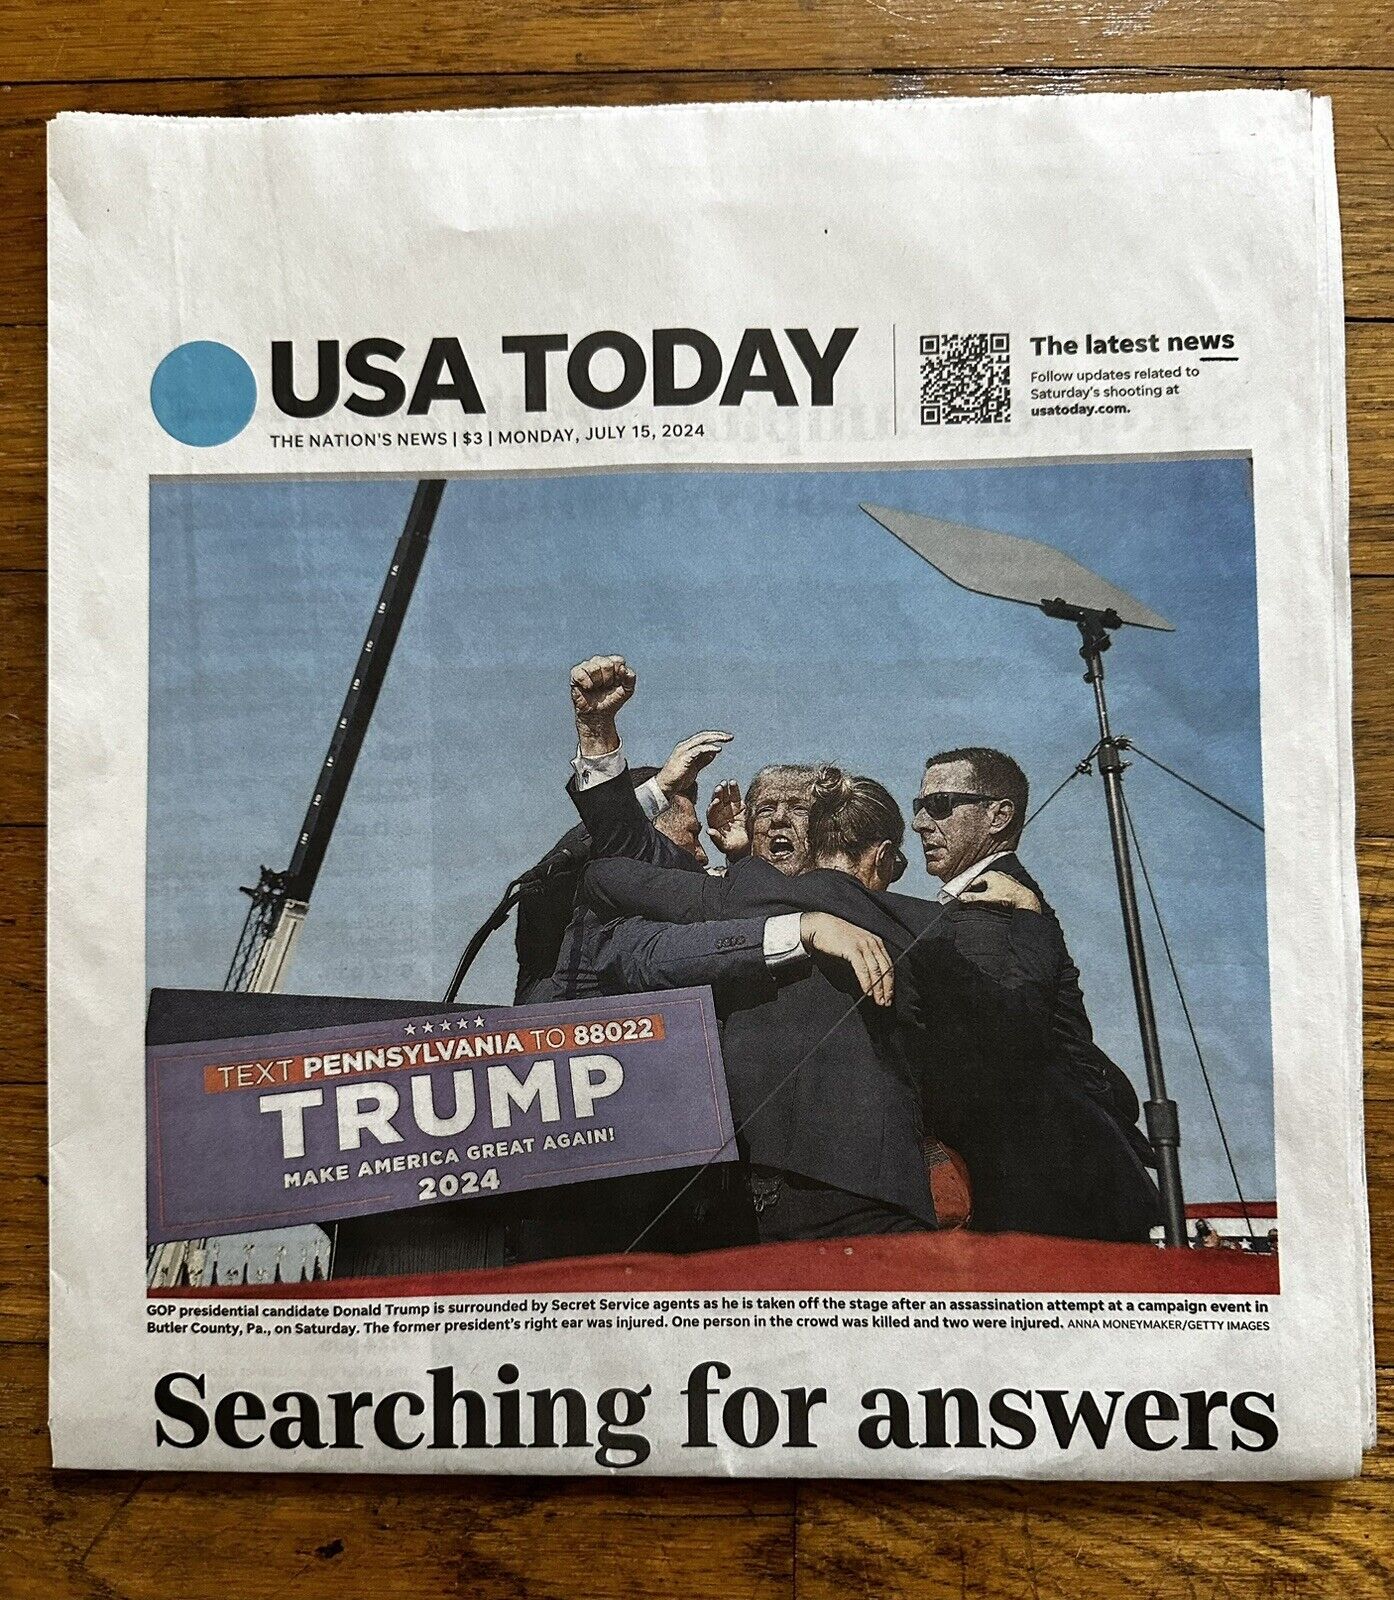 USA TODAY Searching For Answers Donald Trump Shot Headlines Newspaper  July 15